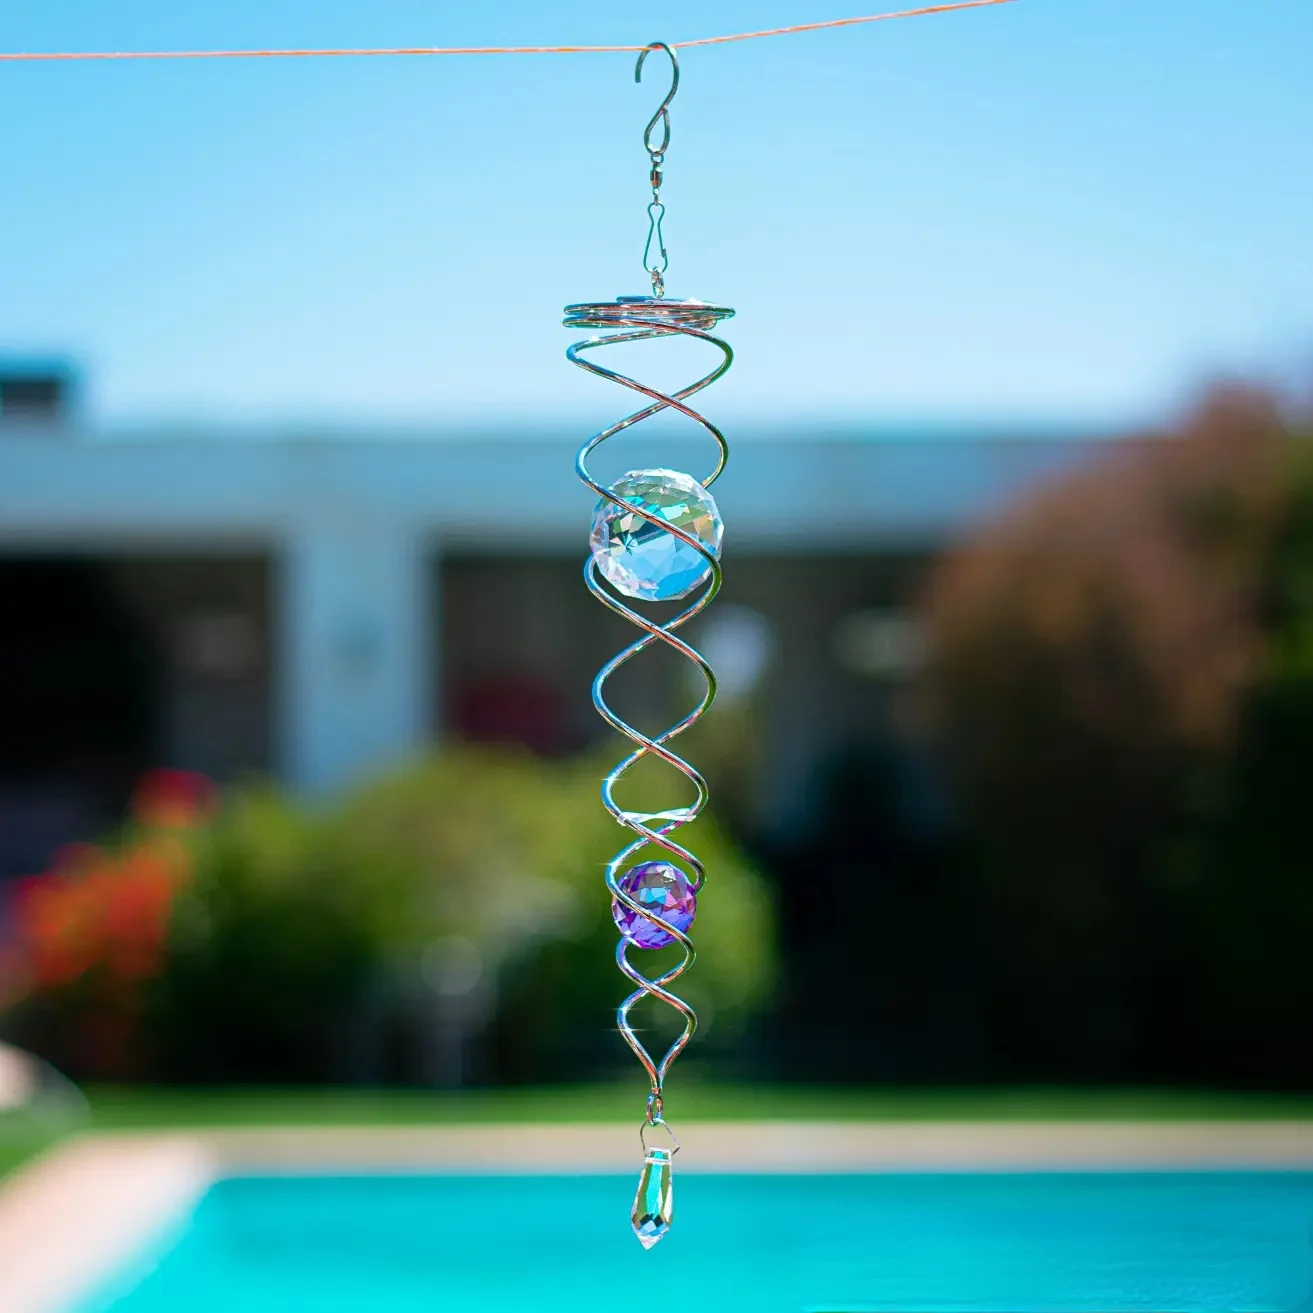 🔥Last Day Promotion-49%OFF - Gazing Ball Spiral Tail Wind Spinner Stabilizer